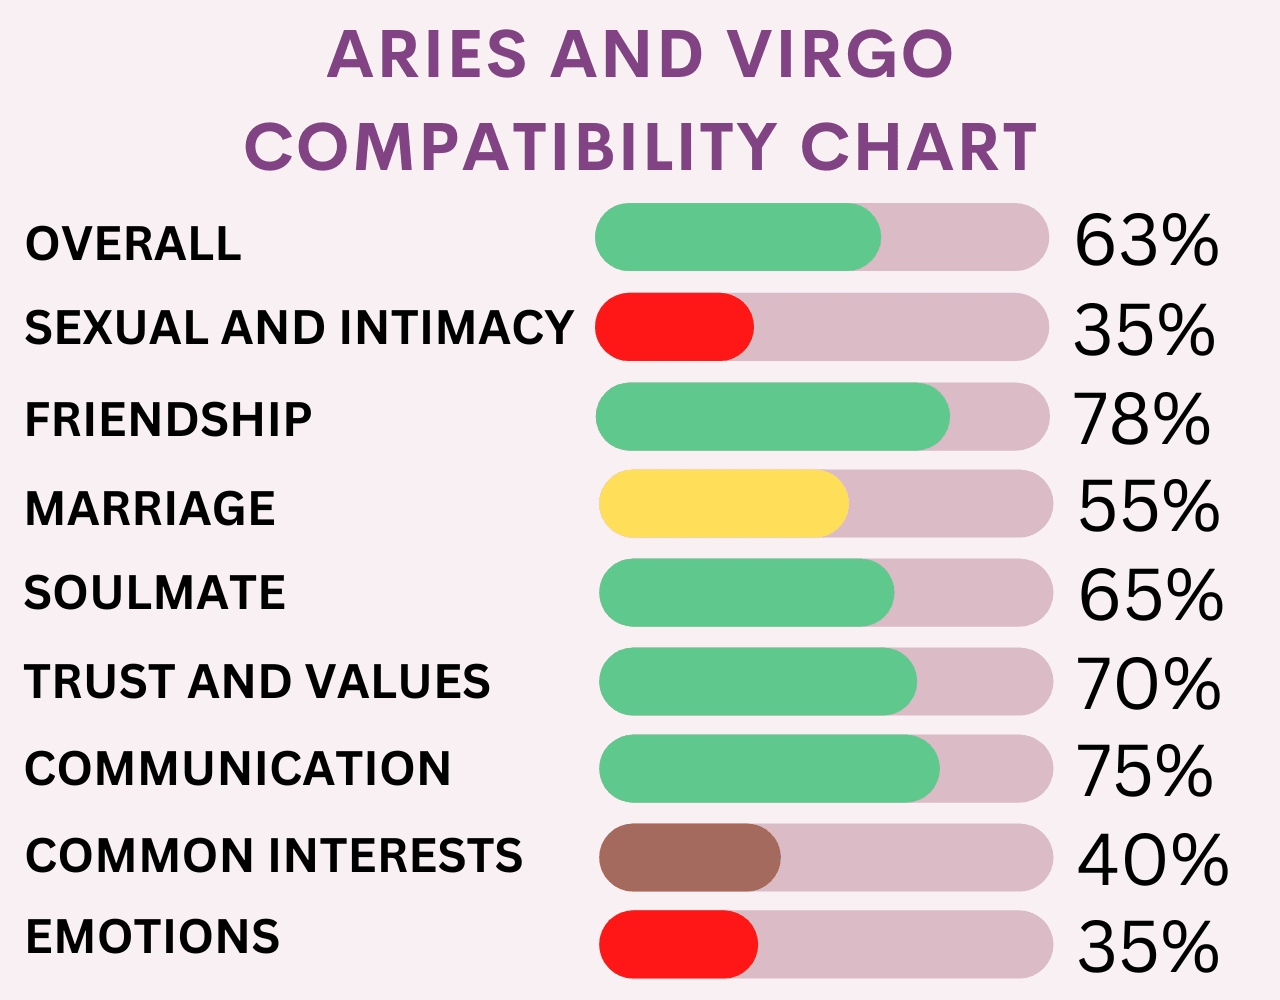 Aries and Virgo Compatibility chart